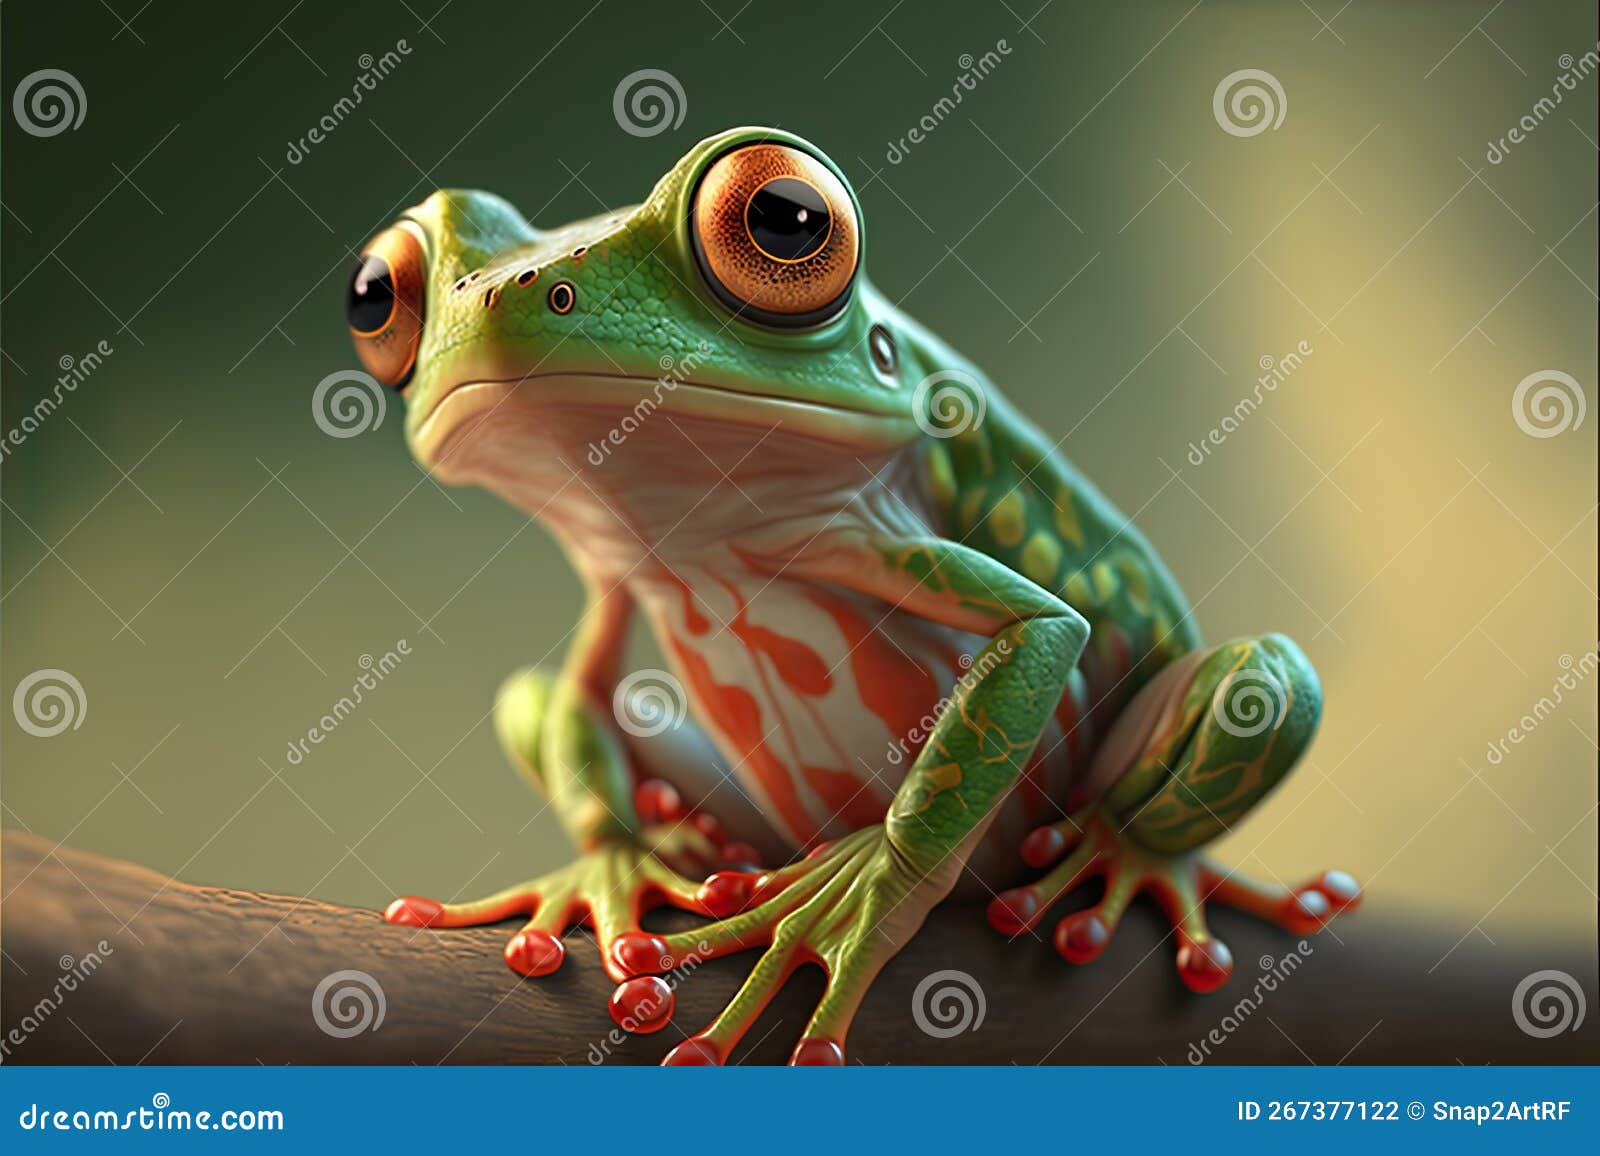 Photo Realistic 3D Render of a Cute Little Green Frog Sitting on a Branch  Stock Illustration - Illustration of green, posed: 267377122